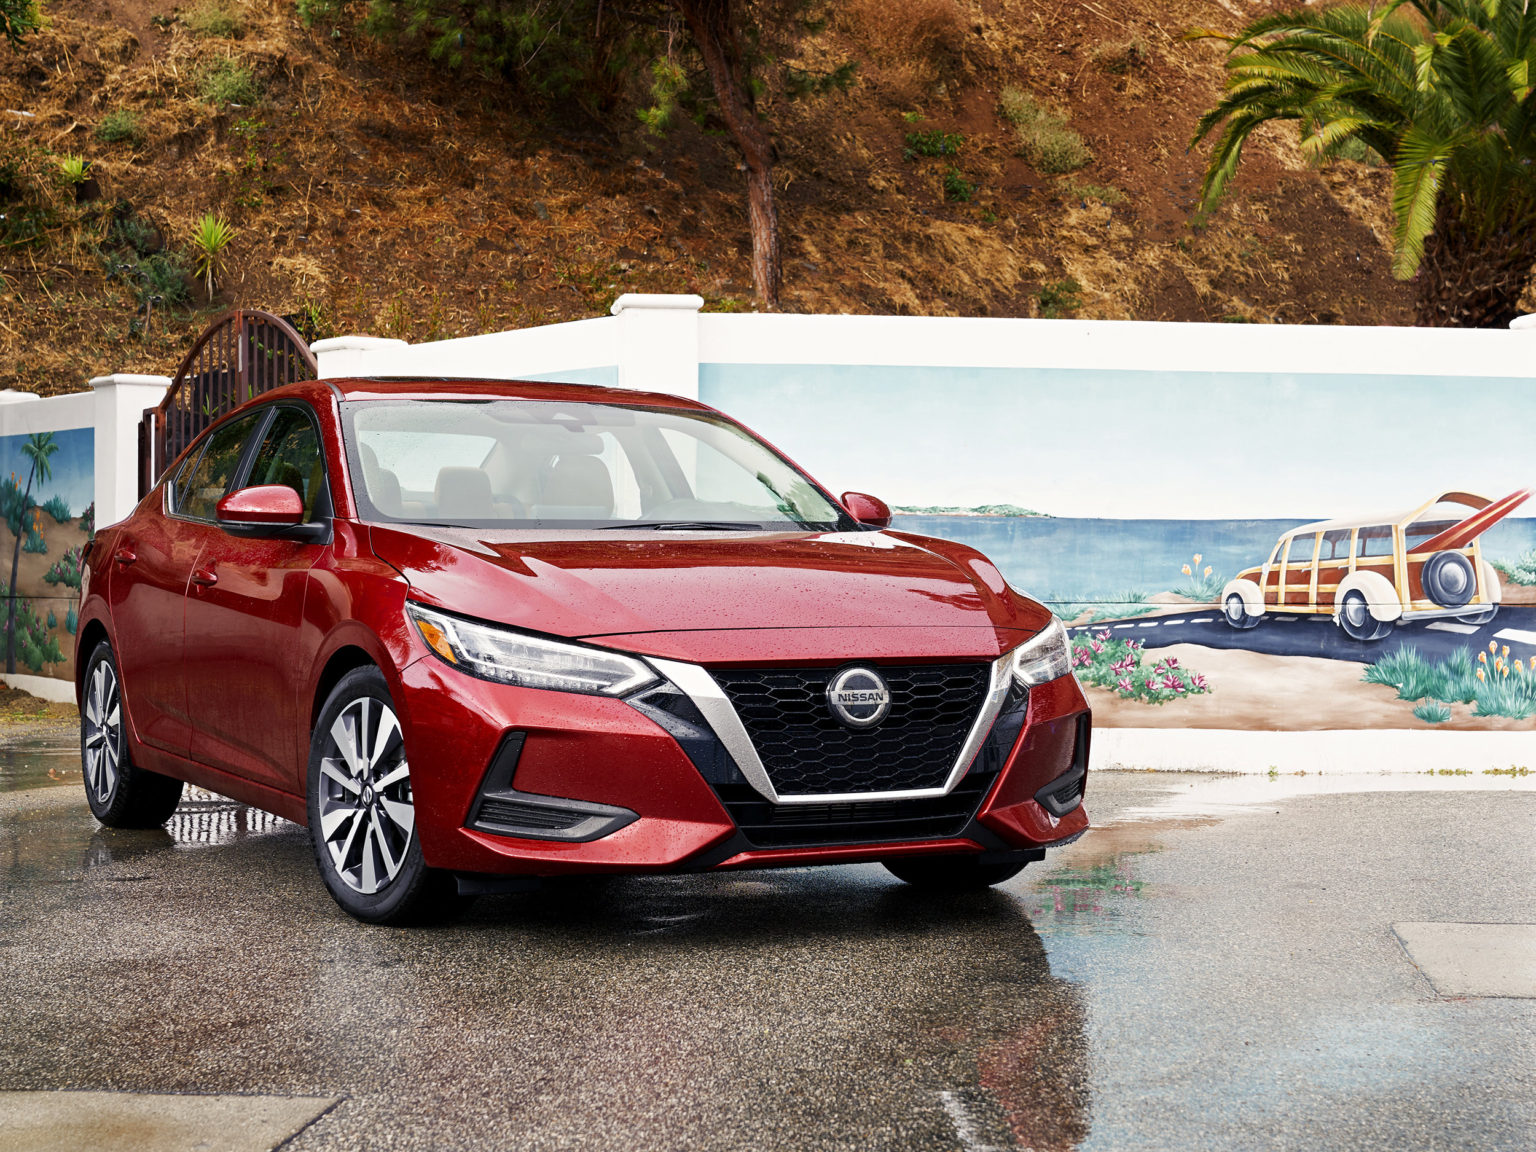 The Nissan Sentra offers the most standard safety features in its class.